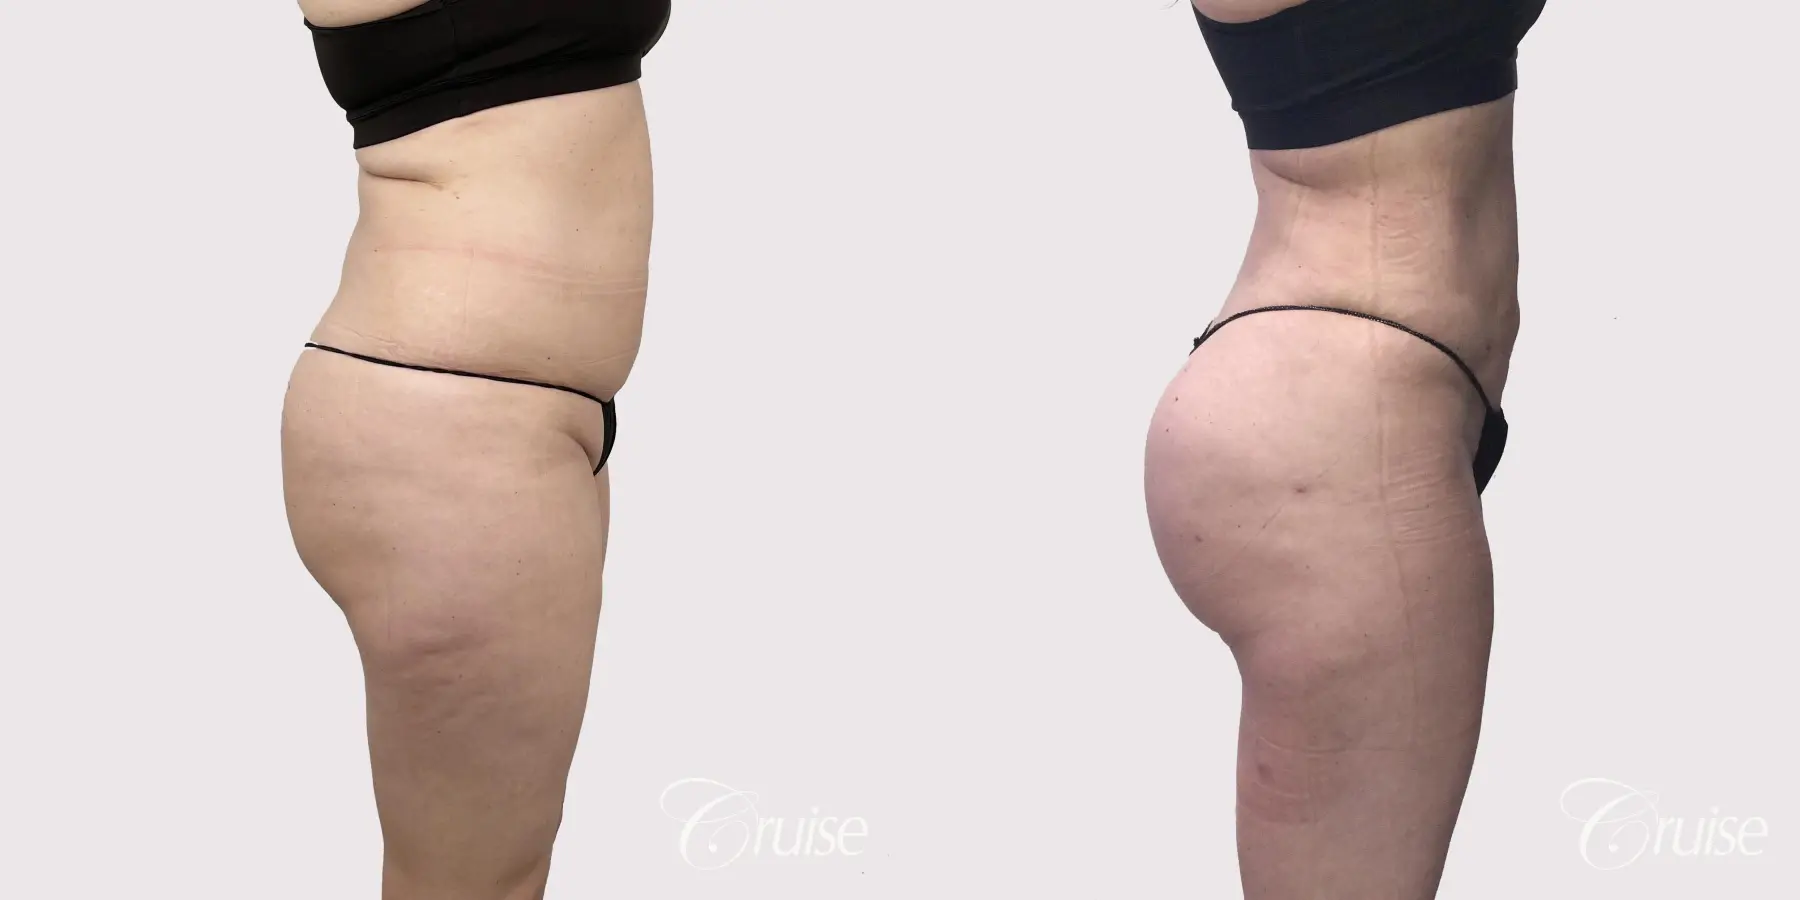 Brazilian Butt Lift: Patient 2 - Before and After 4